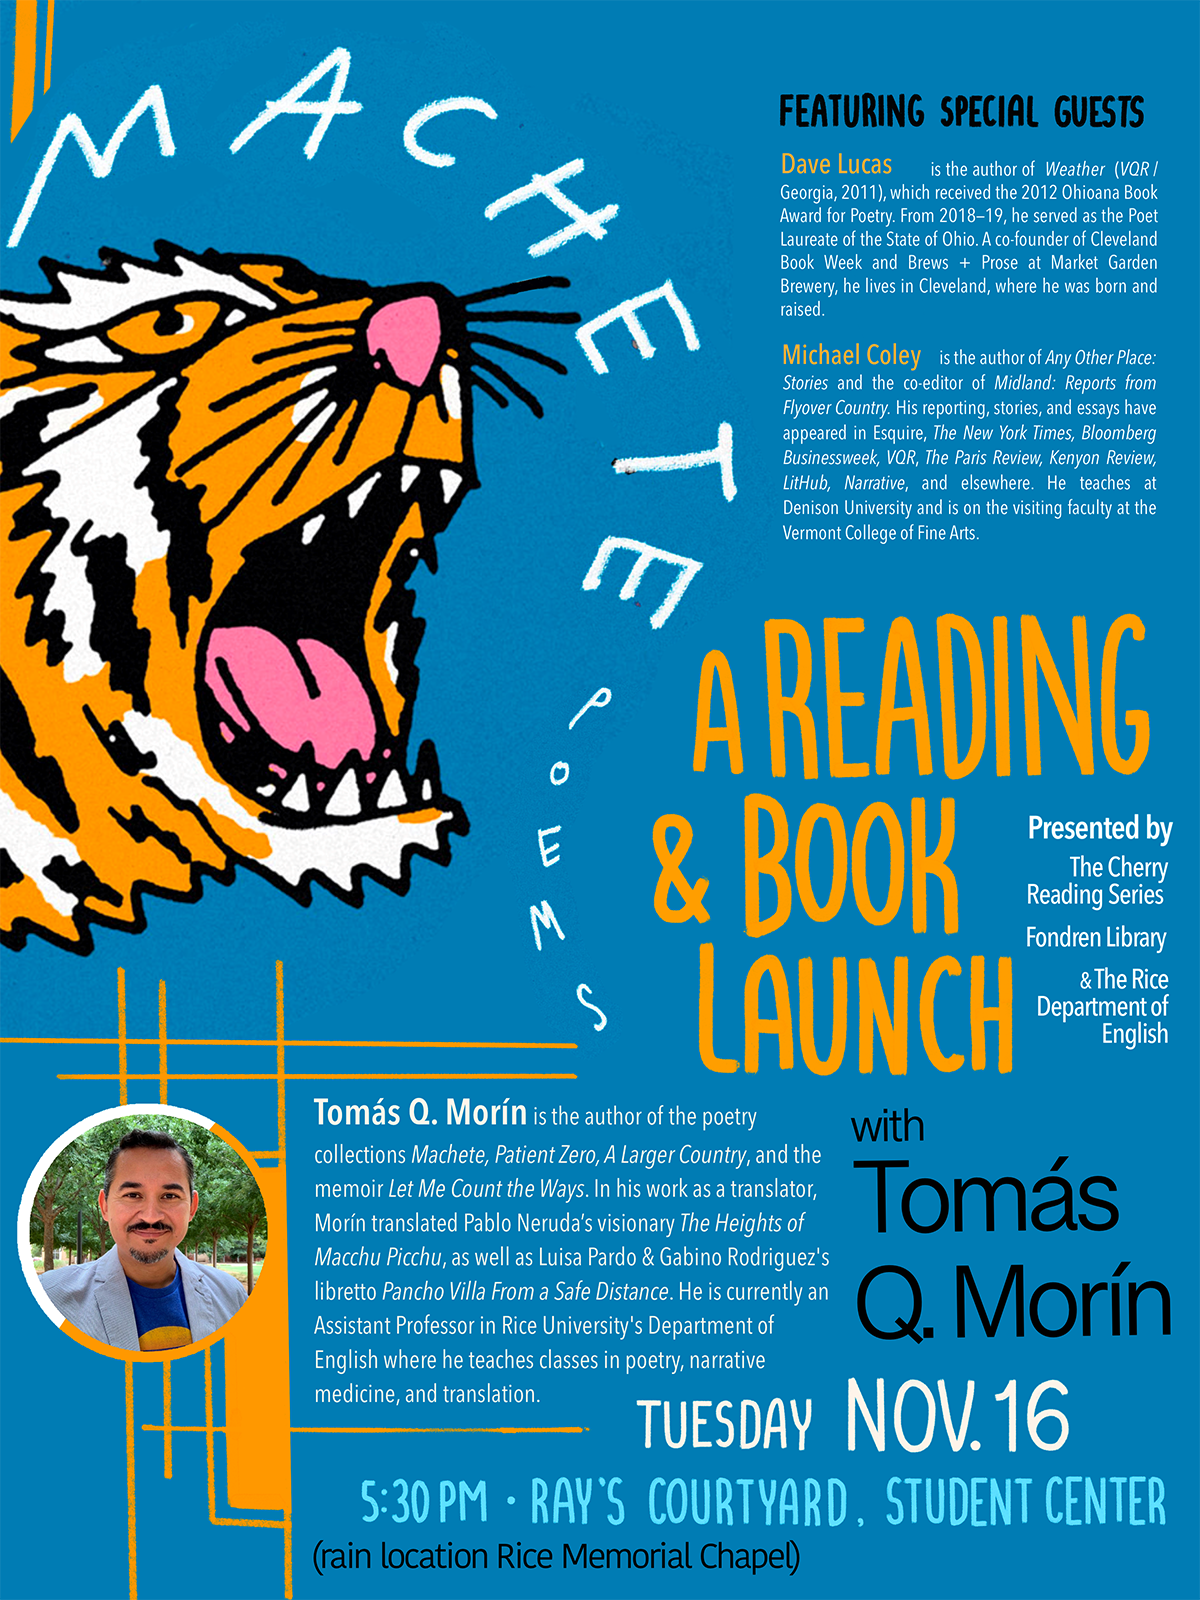 A Reading and Book Launch with Tomás Q. Morín.